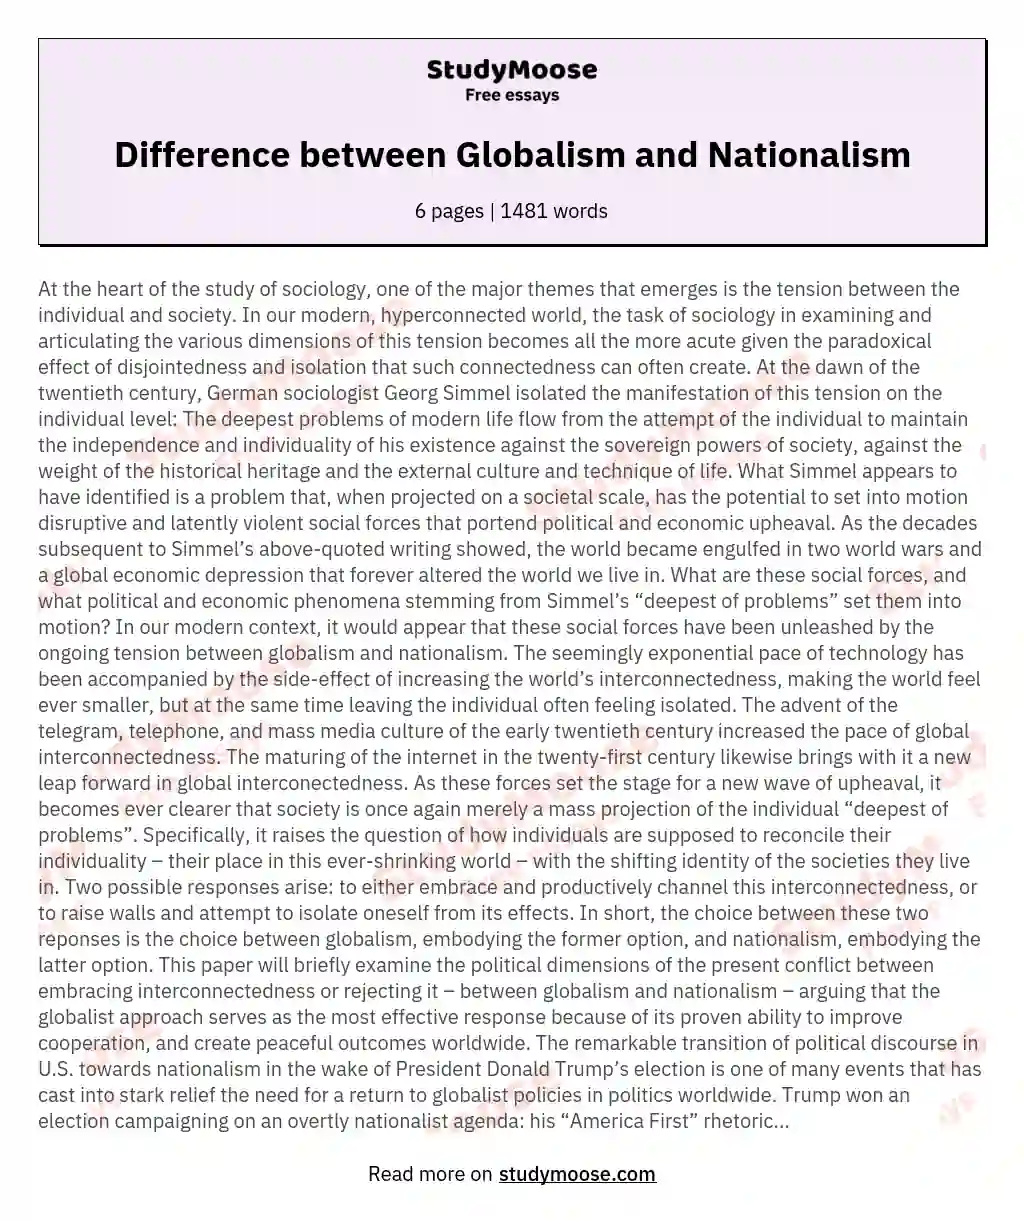 Difference between Globalism and Nationalism essay